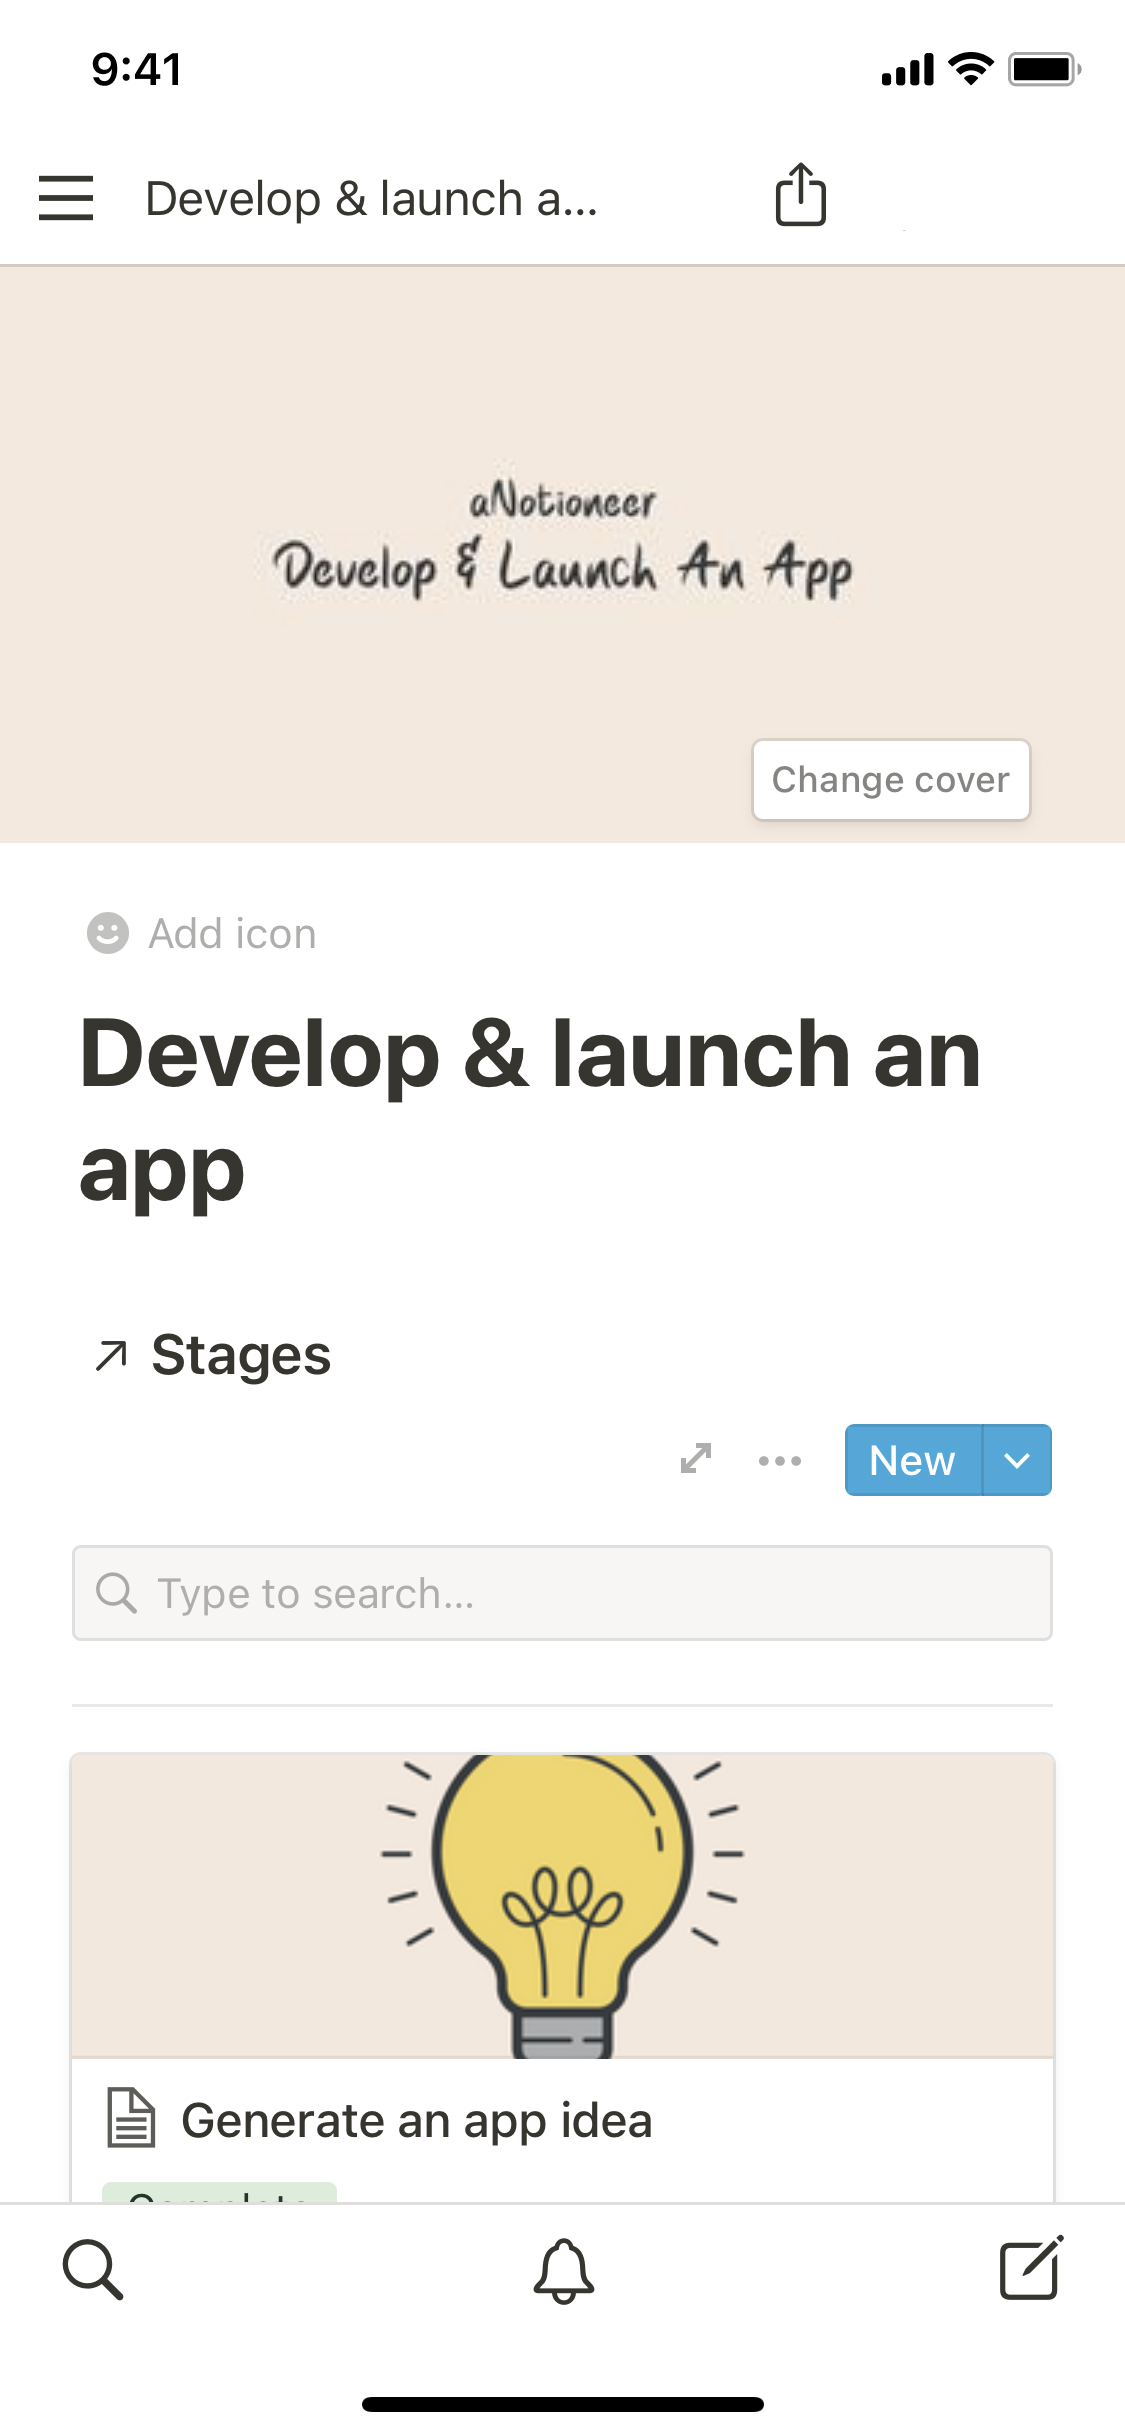 The mobile image for the Develop & launch an app template